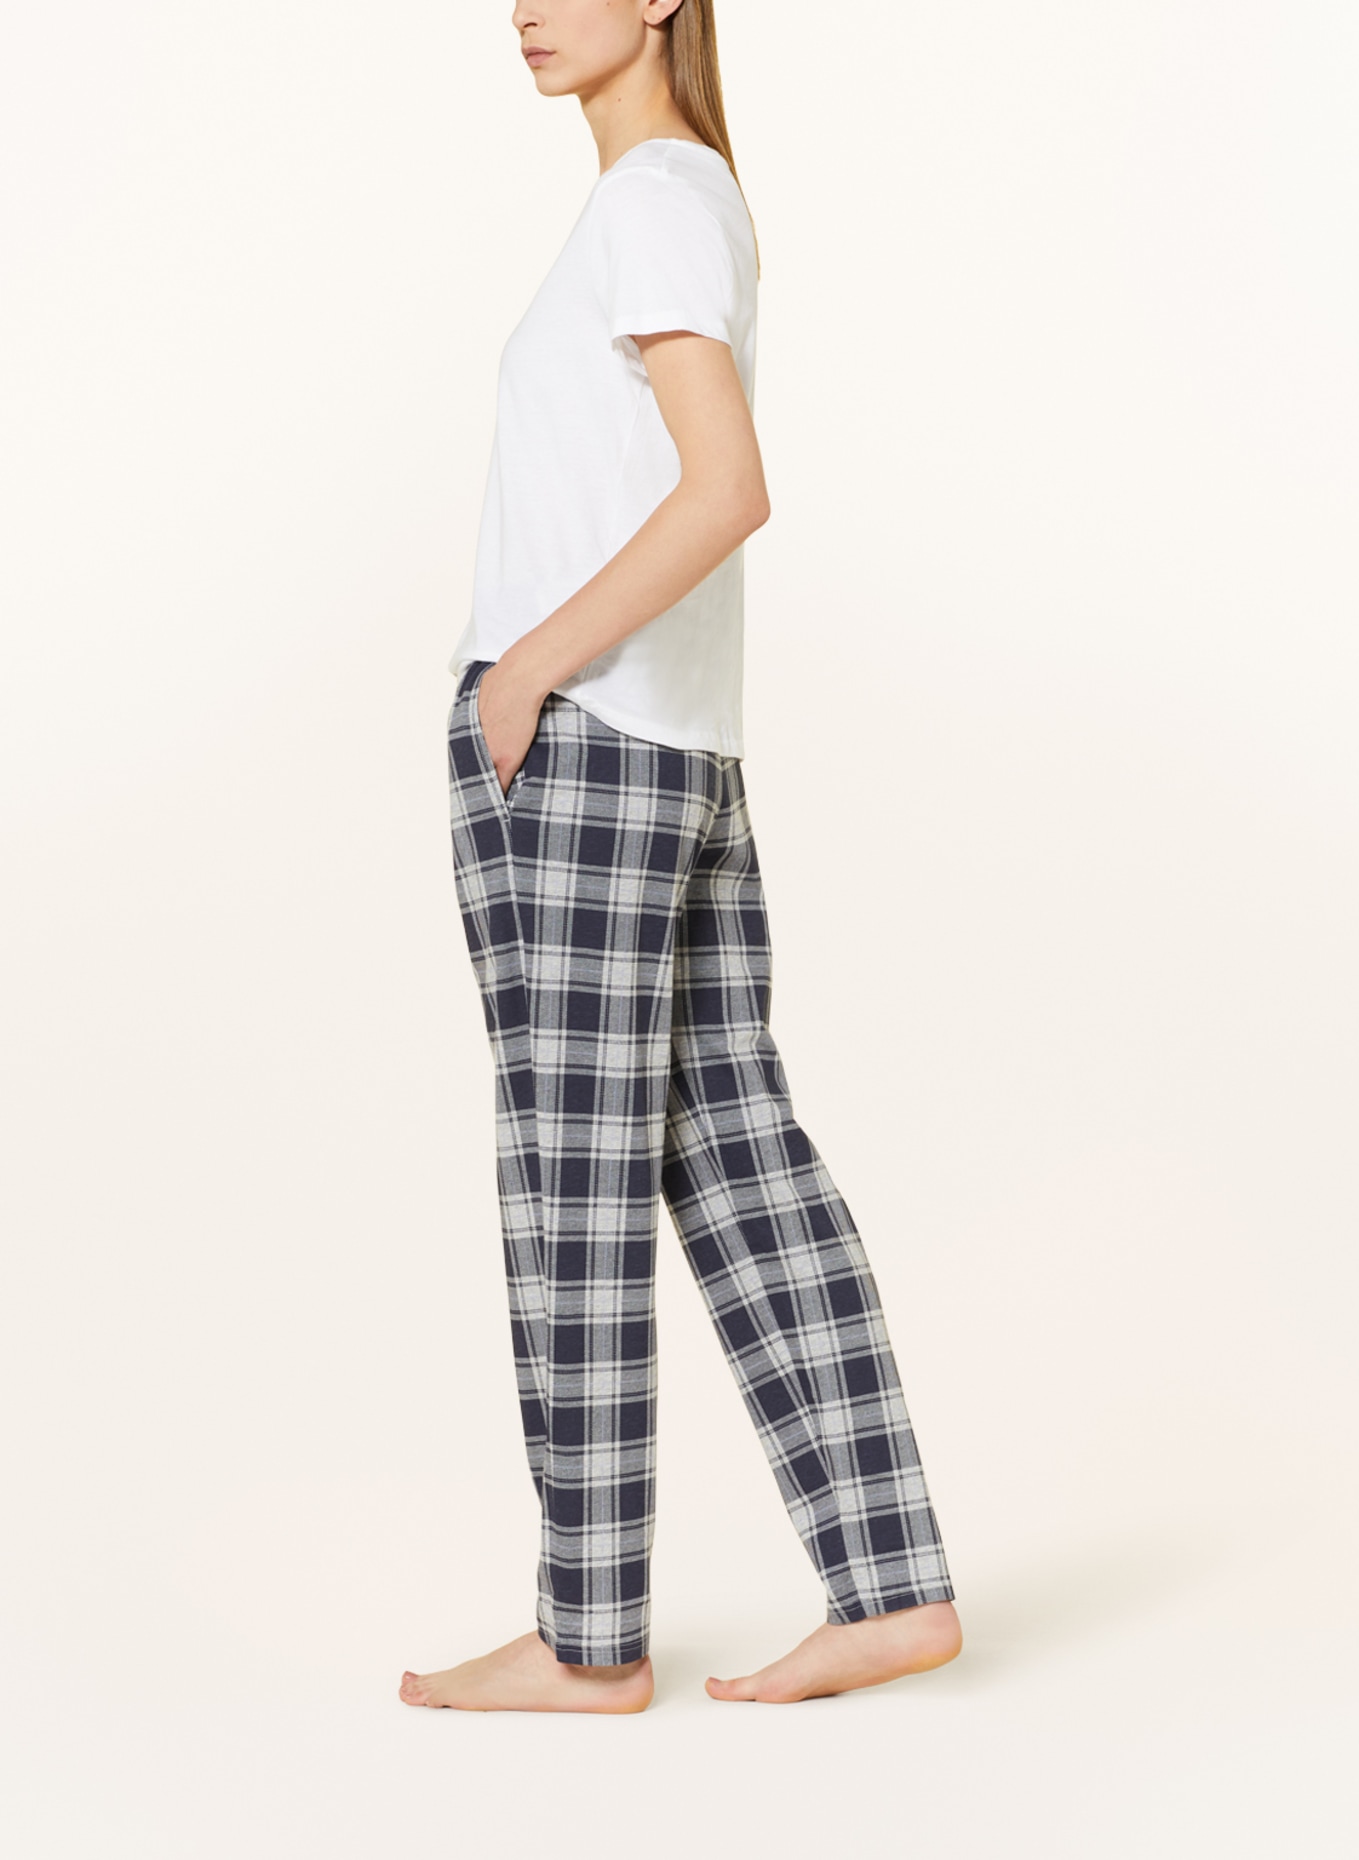 Pajama blue/ blue pants MIX+RELAX SCHIESSER in light